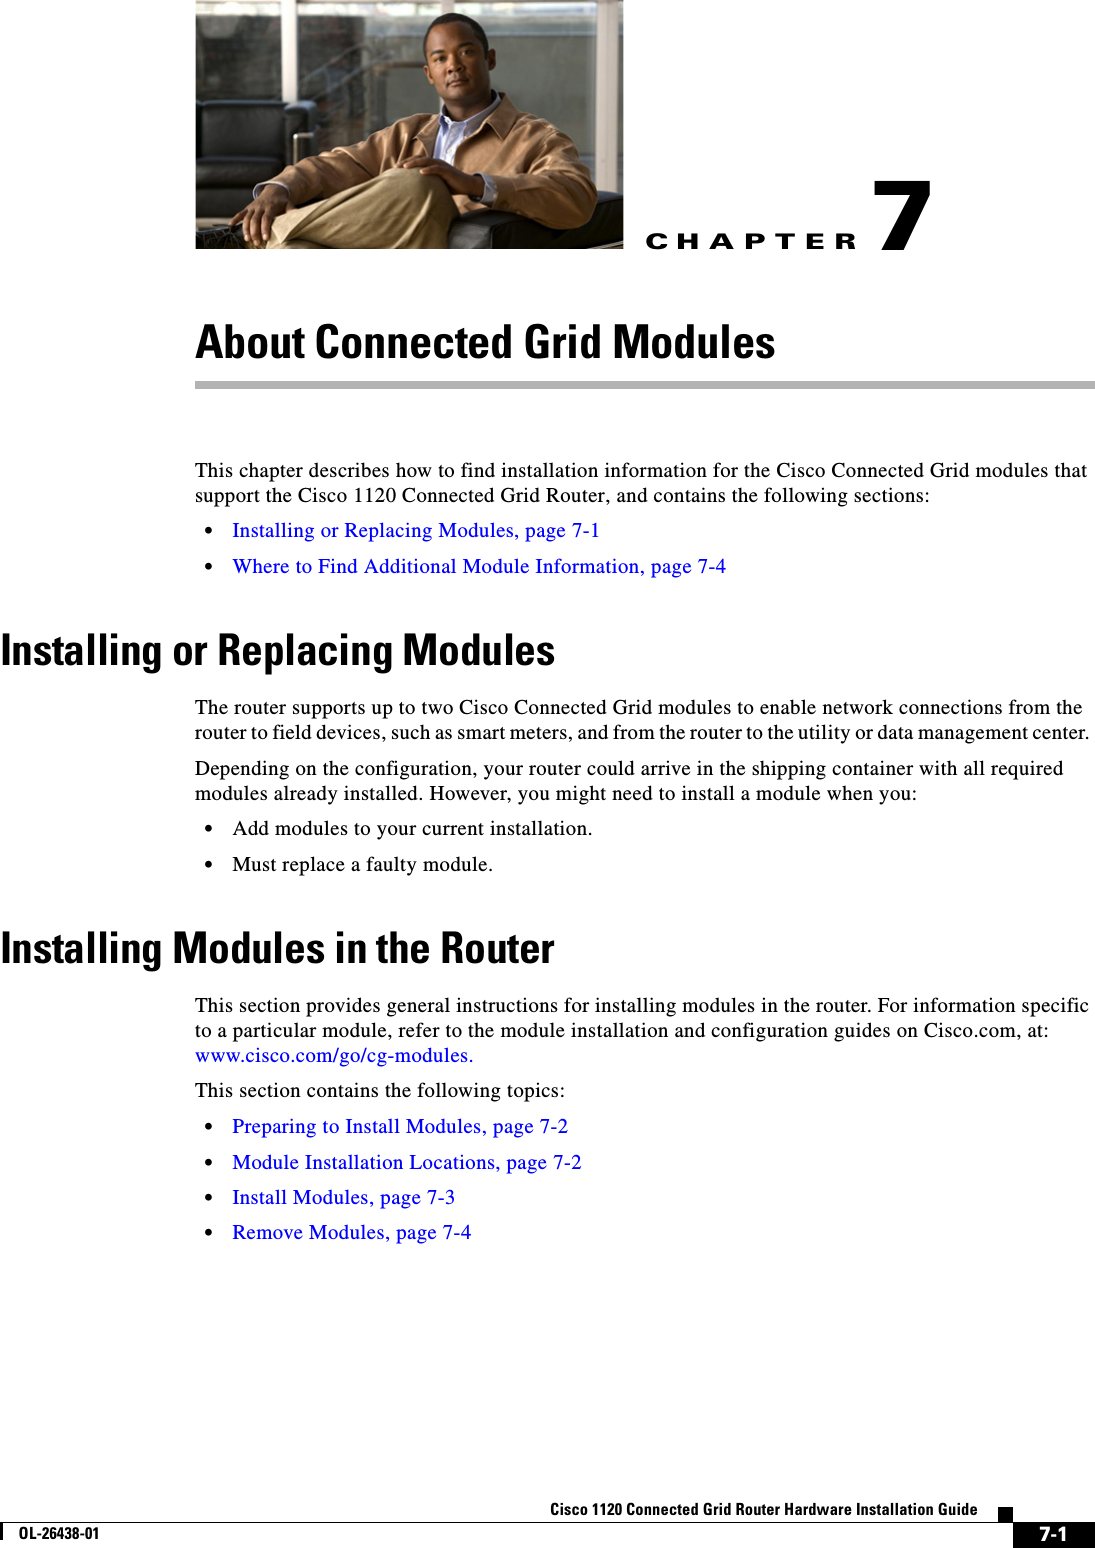 CHAPTER 7-1Cisco 1120 Connected Grid Router Hardware Installation GuideOL-26438-017About Connected Grid ModulesThis chapter describes how to find installation information for the Cisco Connected Grid modules that support the Cisco 1120 Connected Grid Router, and contains the following sections:•Installing or Replacing Modules, page 7-1•Where to Find Additional Module Information, page 7-4Installing or Replacing ModulesThe router supports up to two Cisco Connected Grid modules to enable network connections from the router to field devices, such as smart meters, and from the router to the utility or data management center. Depending on the configuration, your router could arrive in the shipping container with all required modules already installed. However, you might need to install a module when you:•Add modules to your current installation.•Must replace a faulty module. Installing Modules in the RouterThis section provides general instructions for installing modules in the router. For information specific to a particular module, refer to the module installation and configuration guides on Cisco.com, at: www.cisco.com/go/cg-modules.This section contains the following topics:•Preparing to Install Modules, page 7-2•Module Installation Locations, page 7-2•Install Modules, page 7-3•Remove Modules, page 7-4